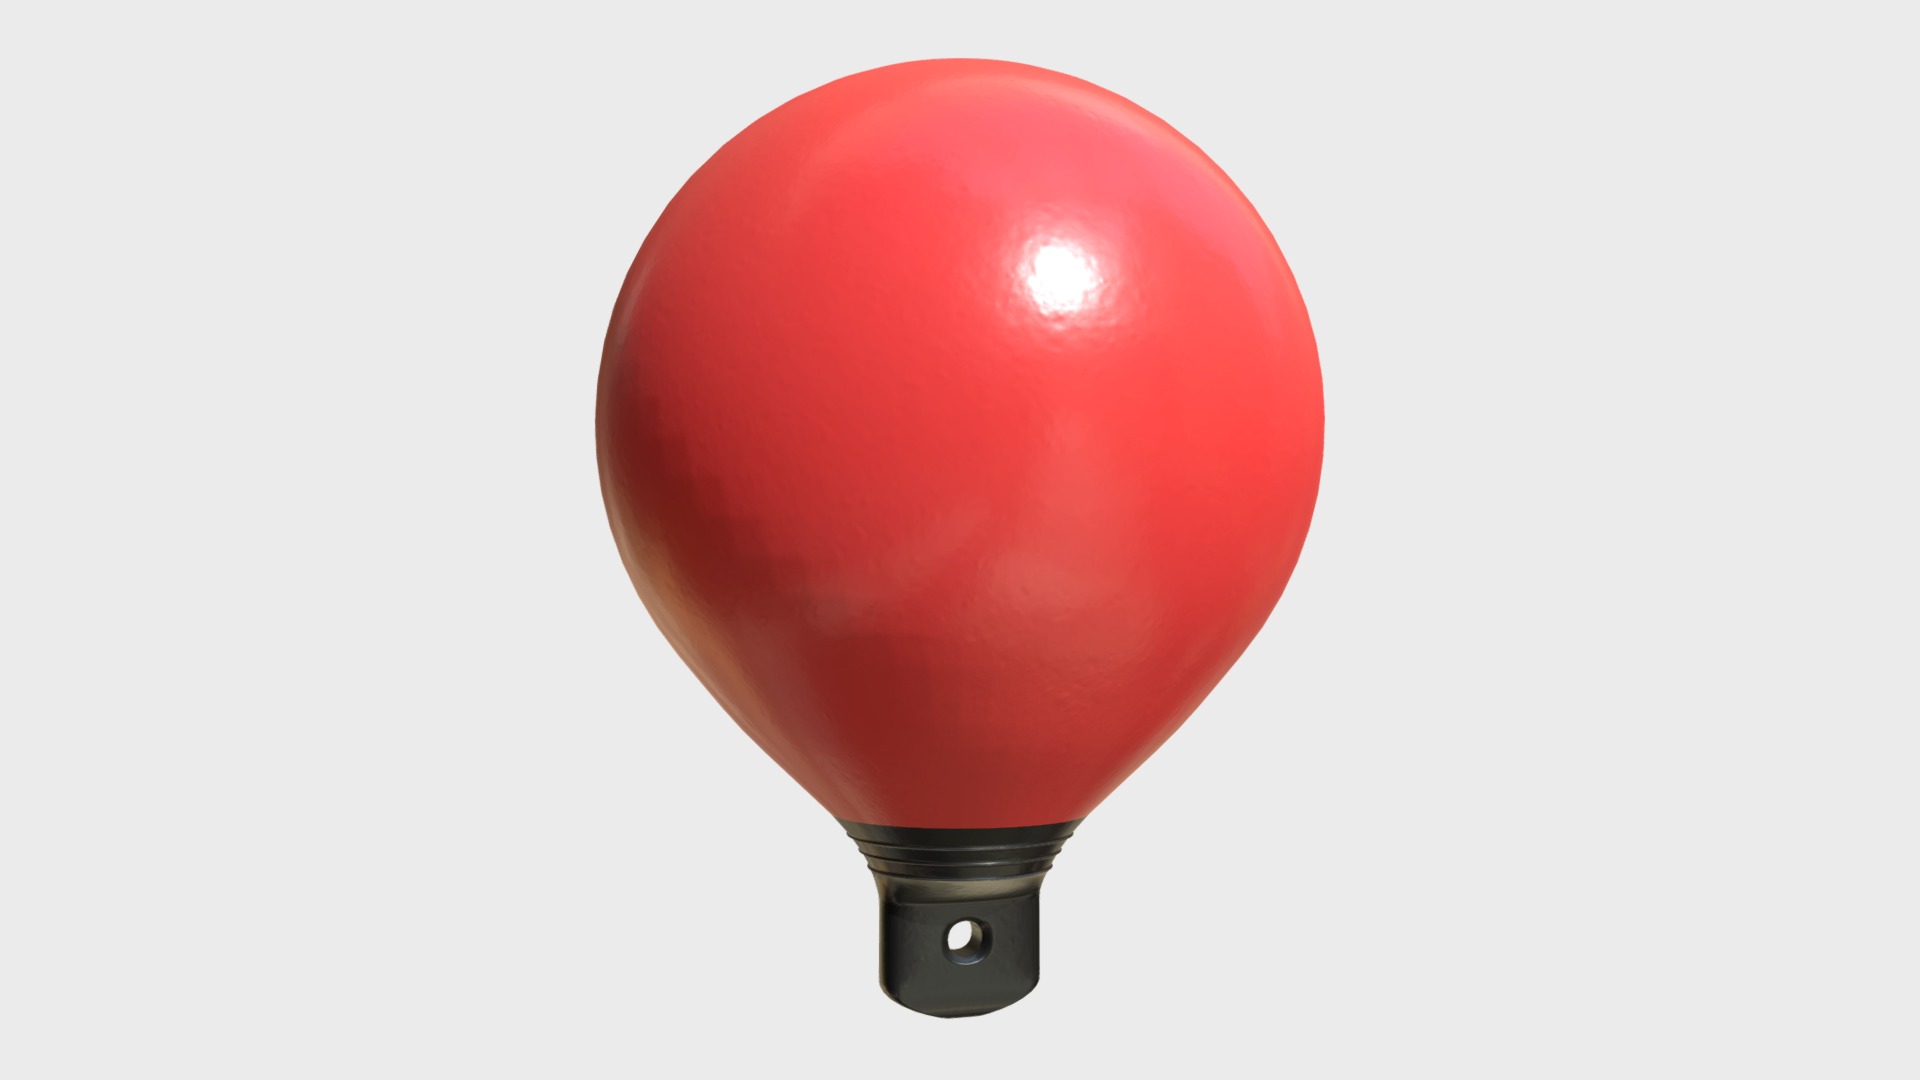 3D model Beach marker buoy - This is a 3D model of the Beach marker buoy. The 3D model is about a red balloon with a black handle.